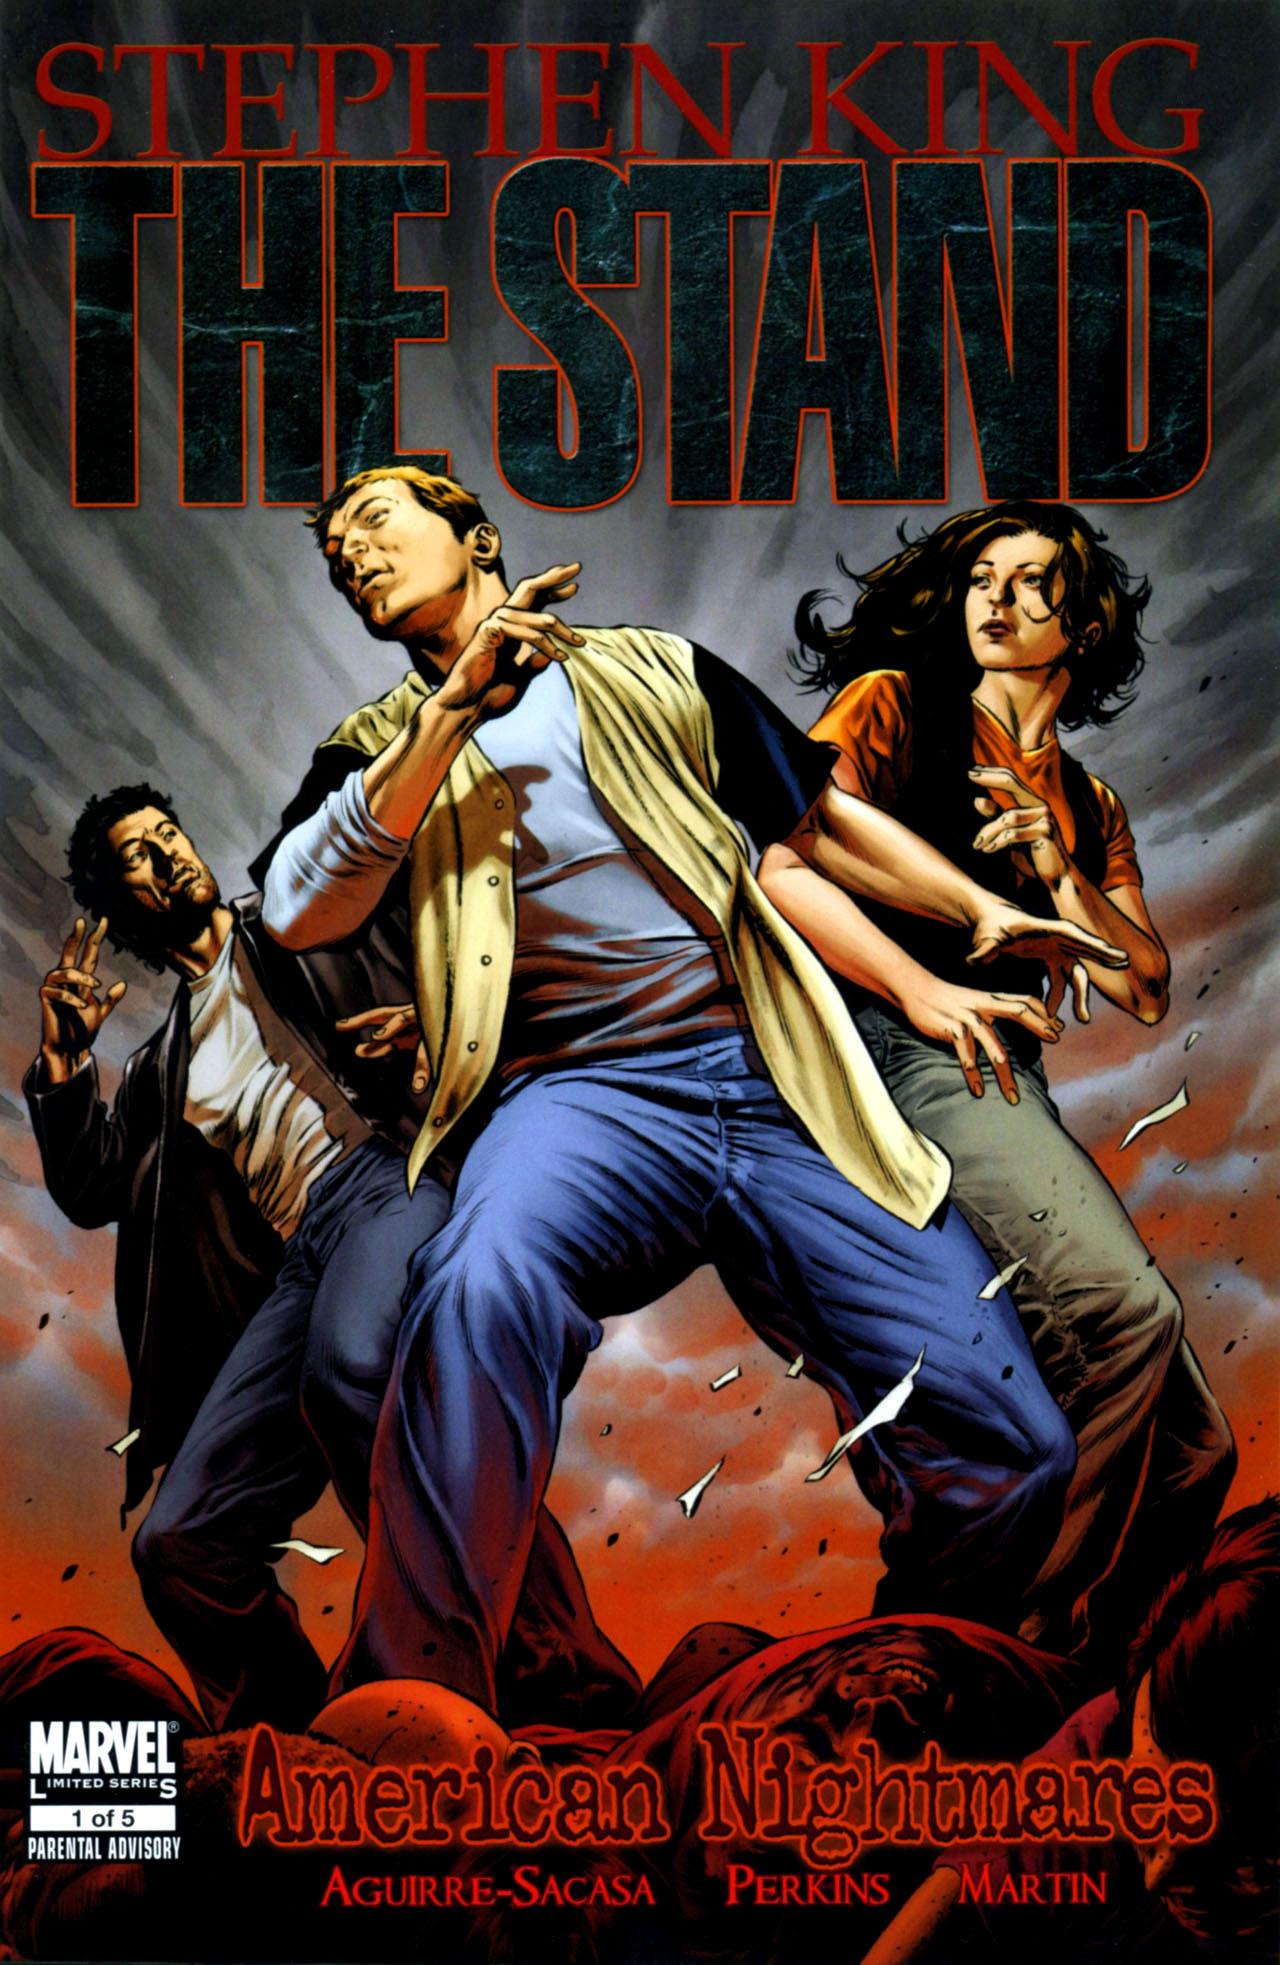 The Stand: American Nightmares Vol. 1 #1